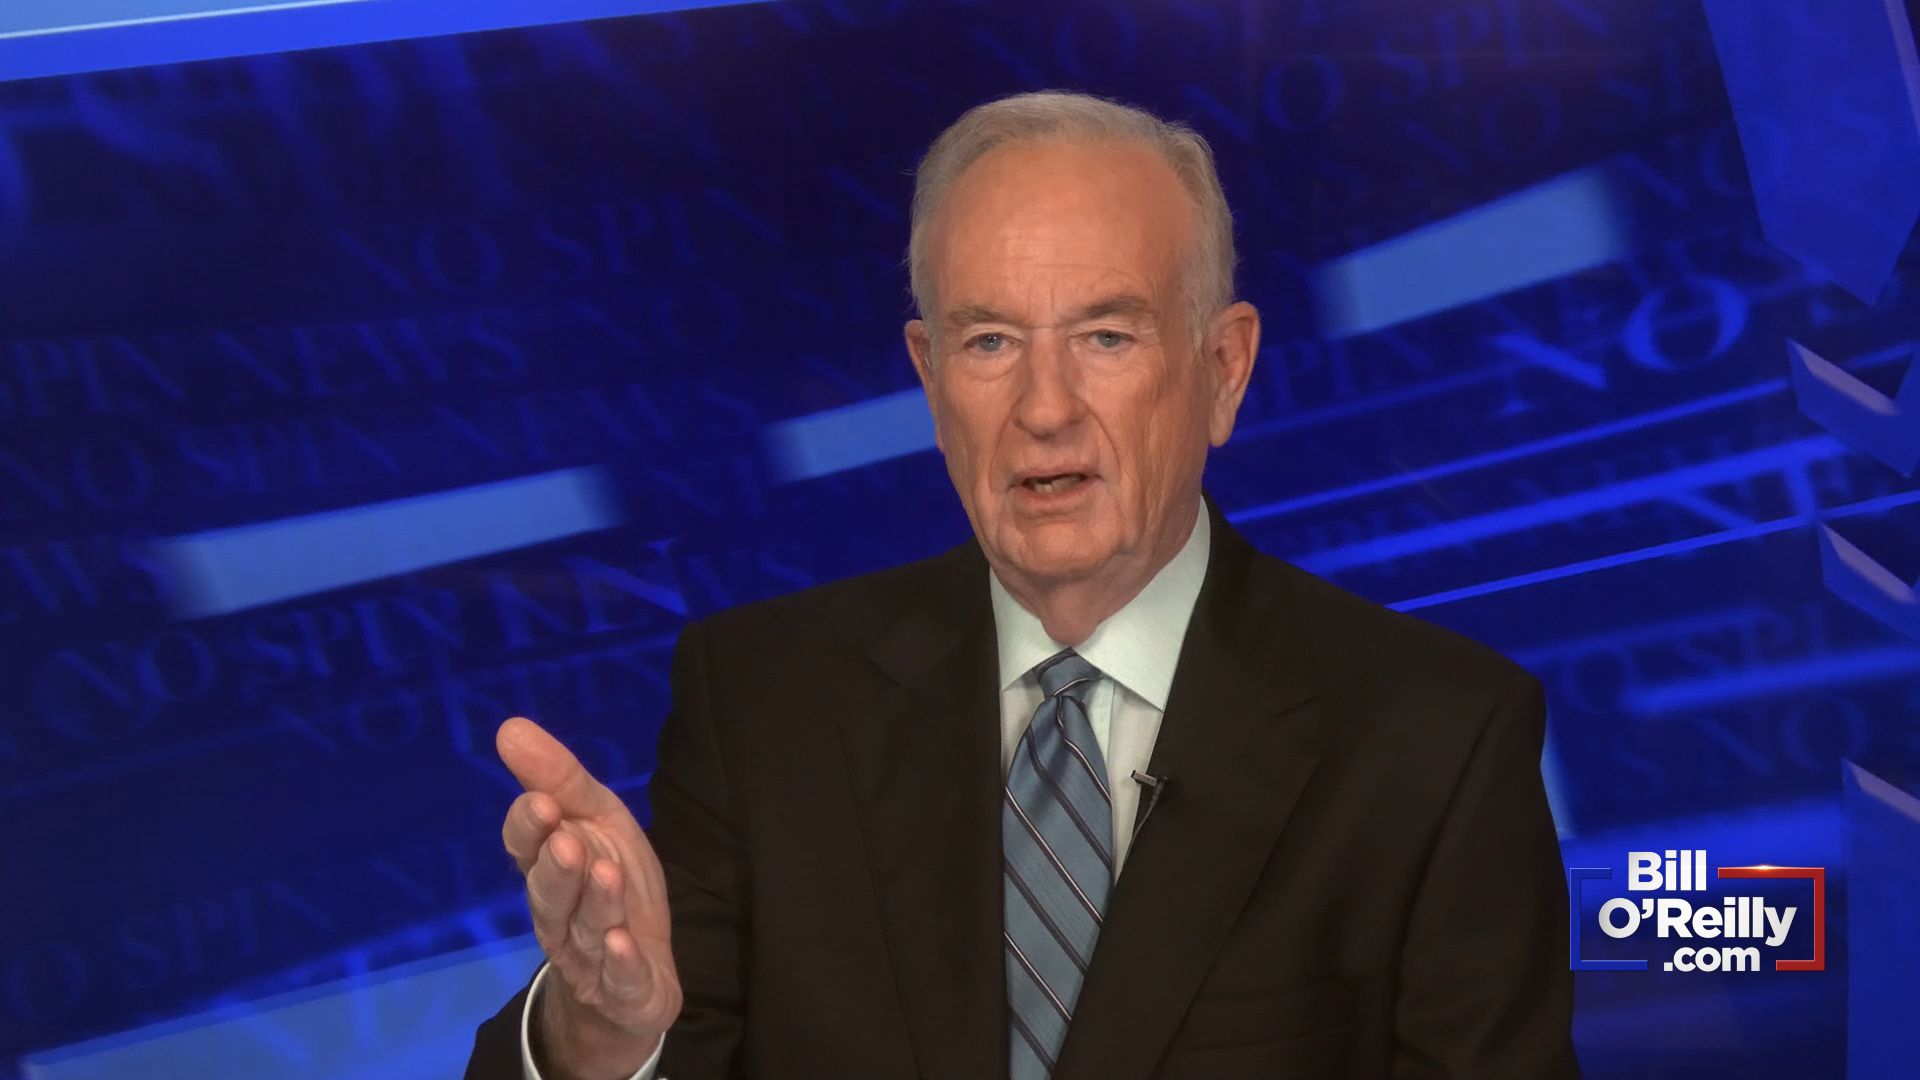 O'Reilly on Biden: 'He Doesn't Know What He's Saying!'